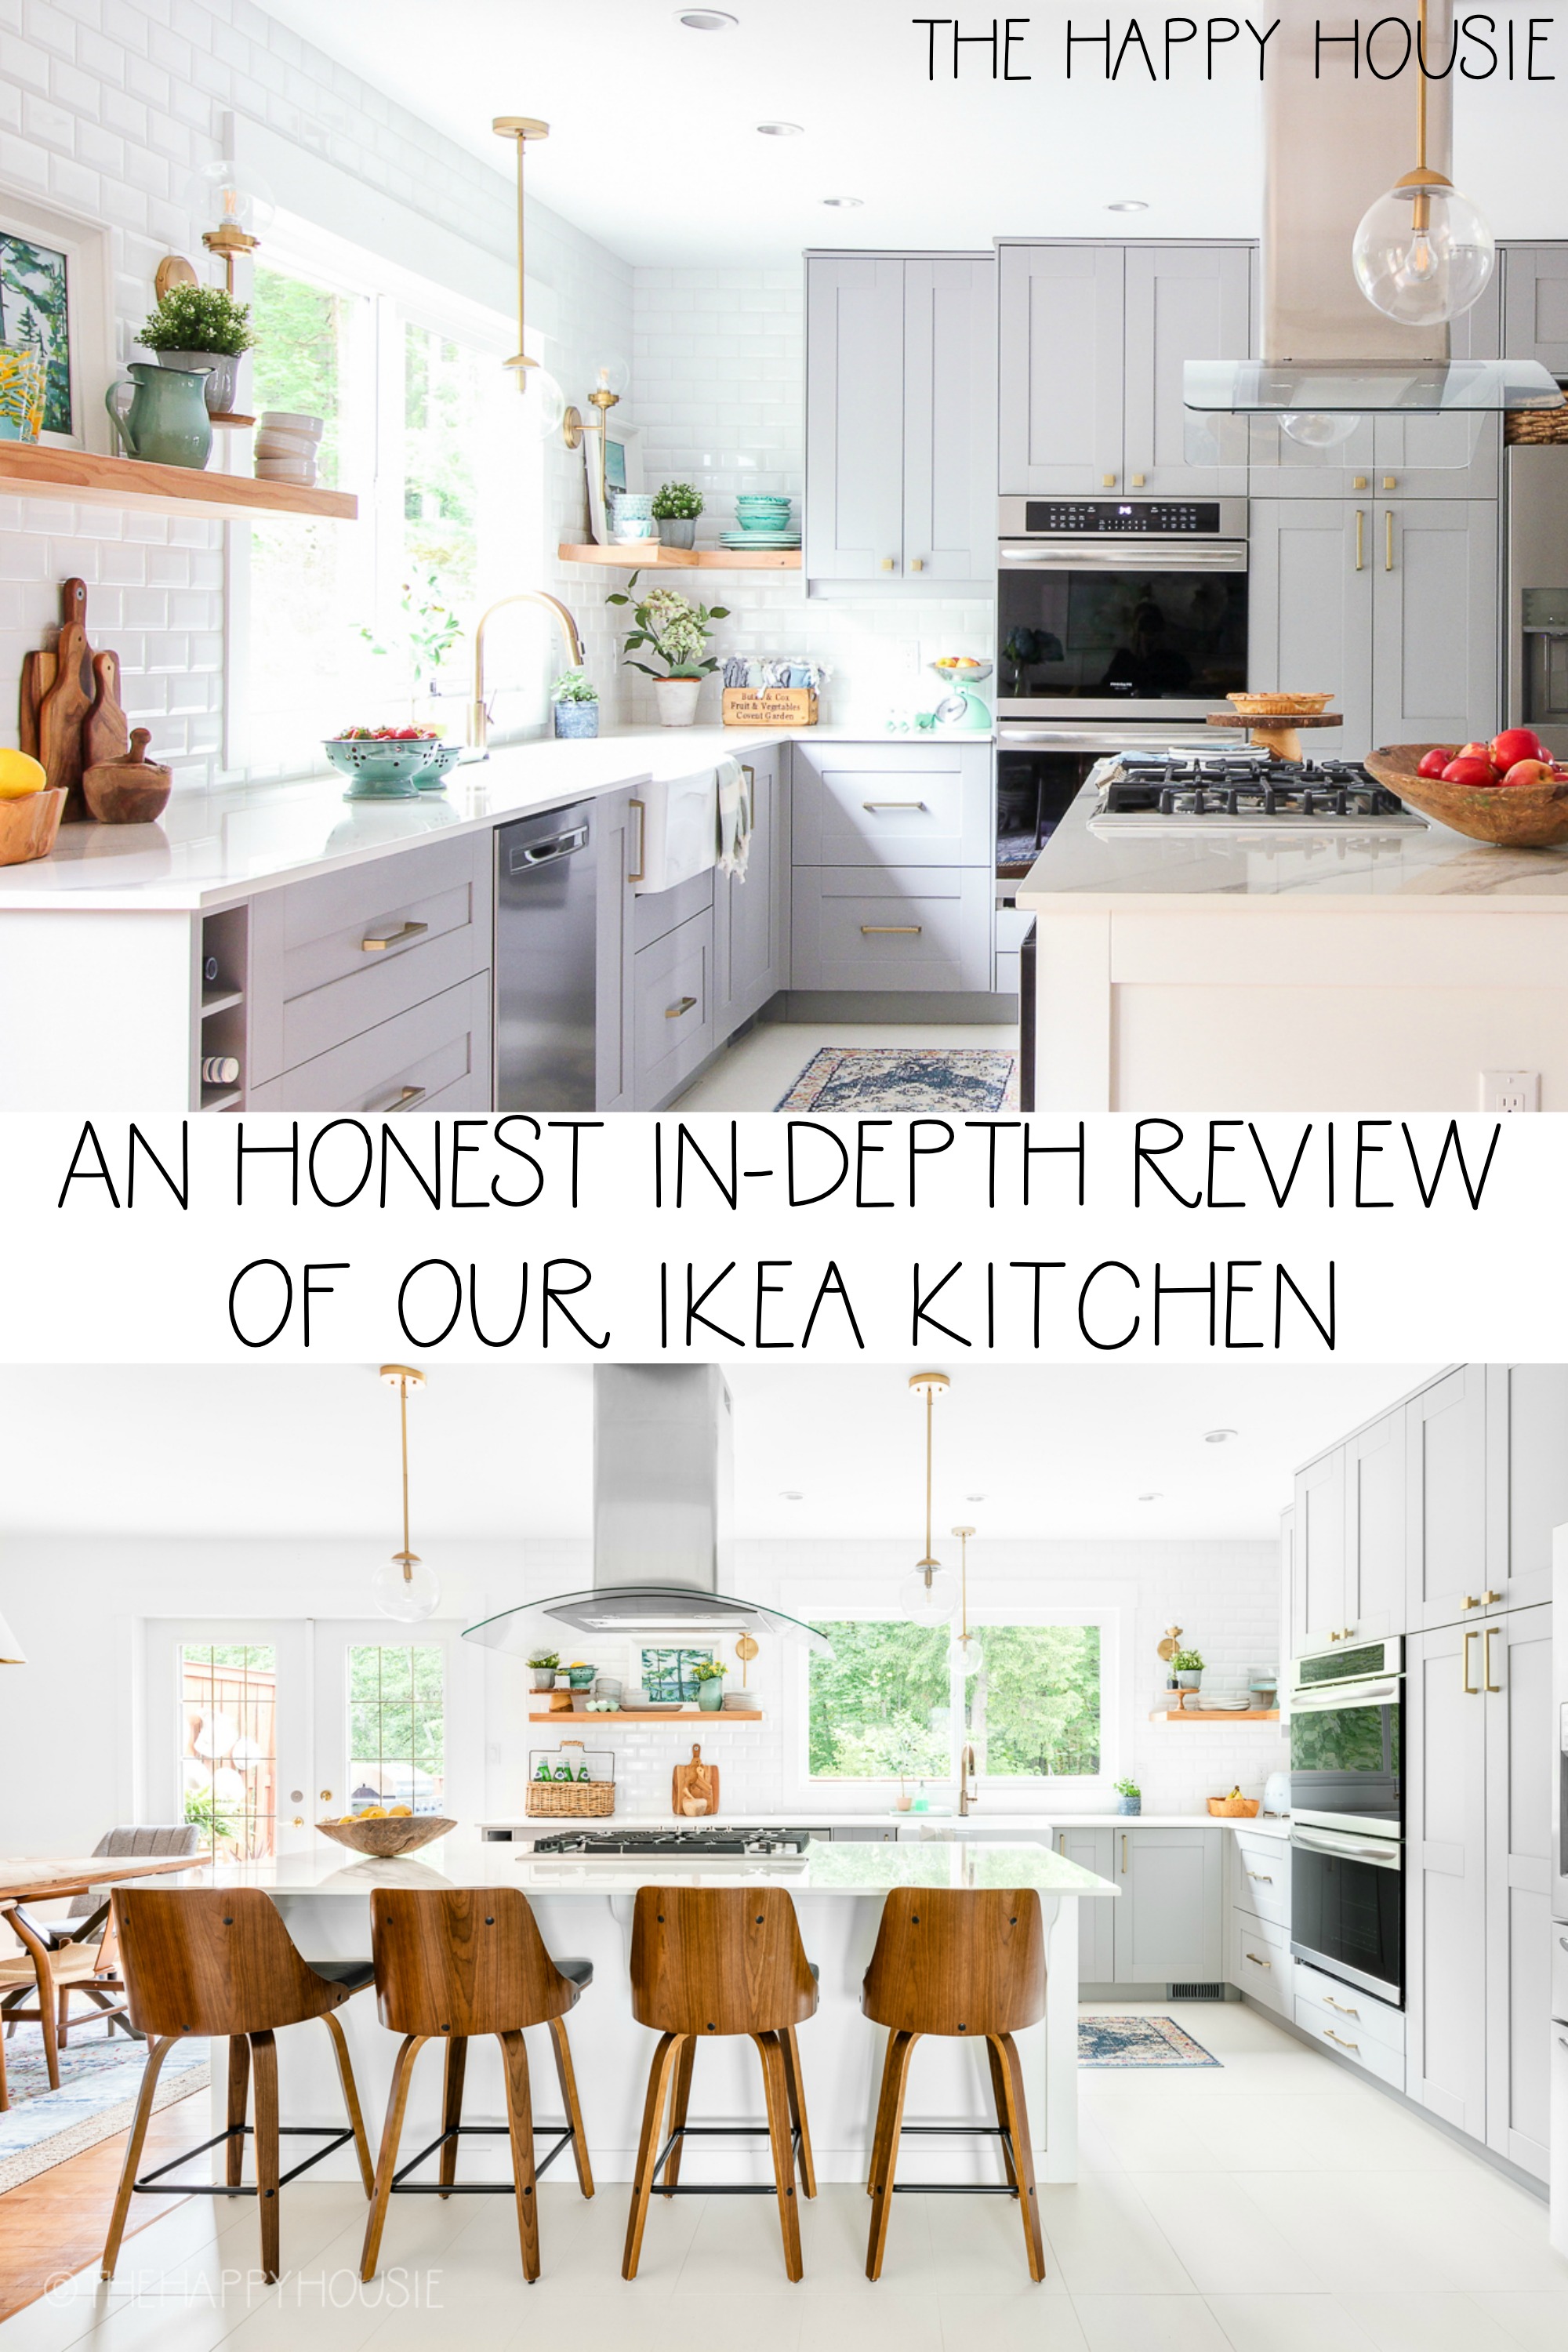 https://www.thehappyhousie.com/wp-content/uploads/2020/10/An-honest-in-depth-review-of-our-Ikea-Kitchen-.jpg